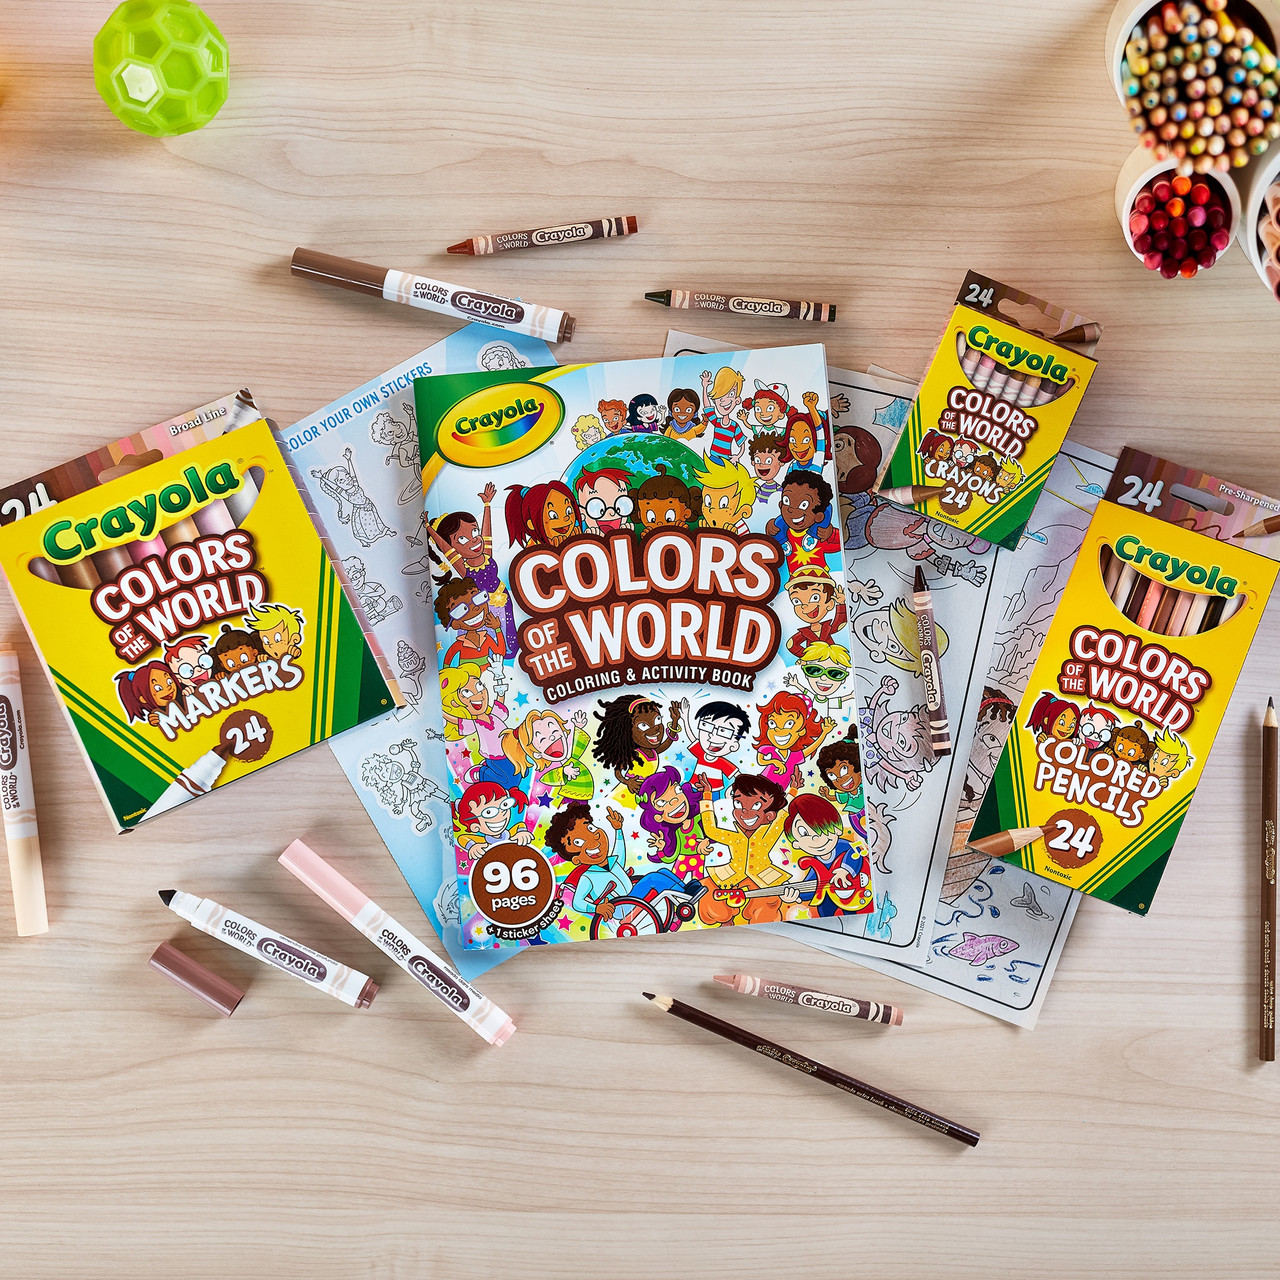 Colors of the World Coloring Book, 48 Pages, Crayola.com